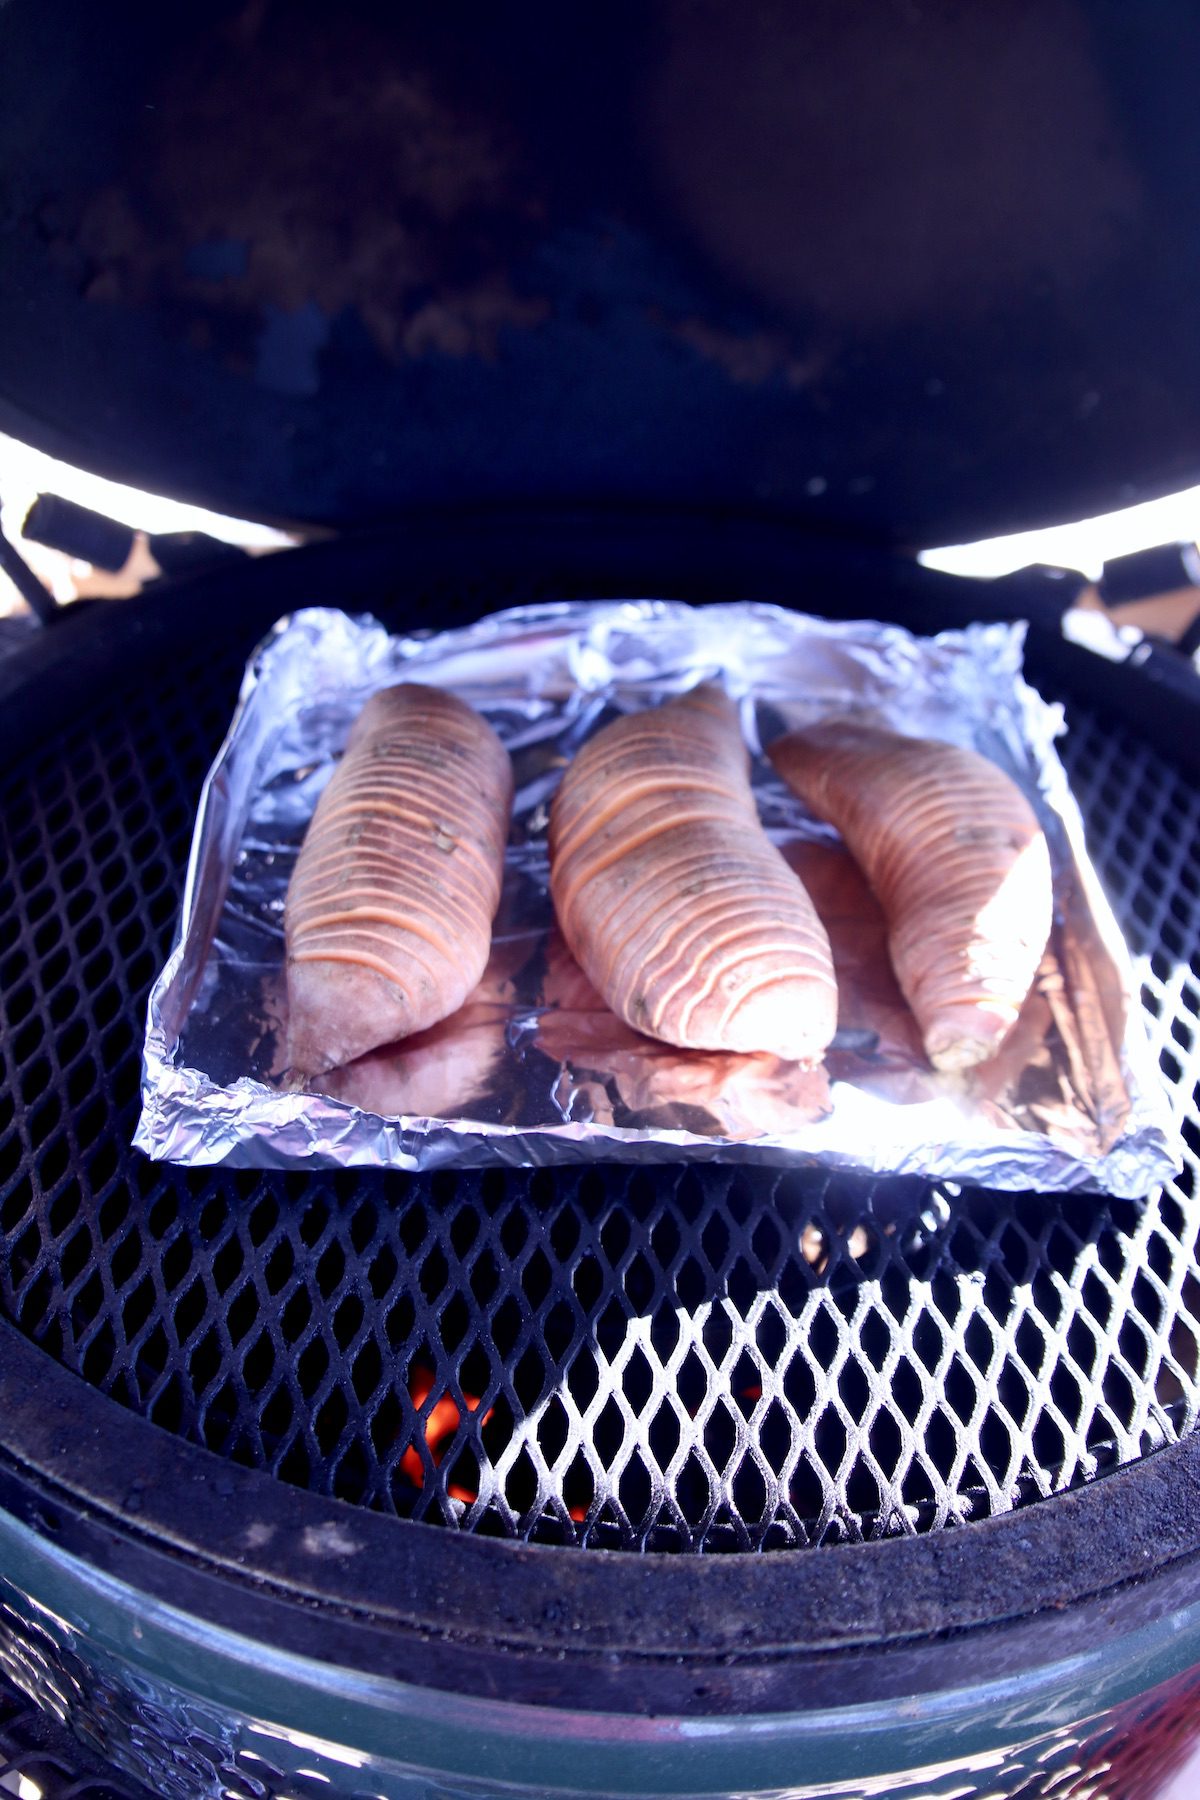 4 hasselback sweet potatoes on the grill